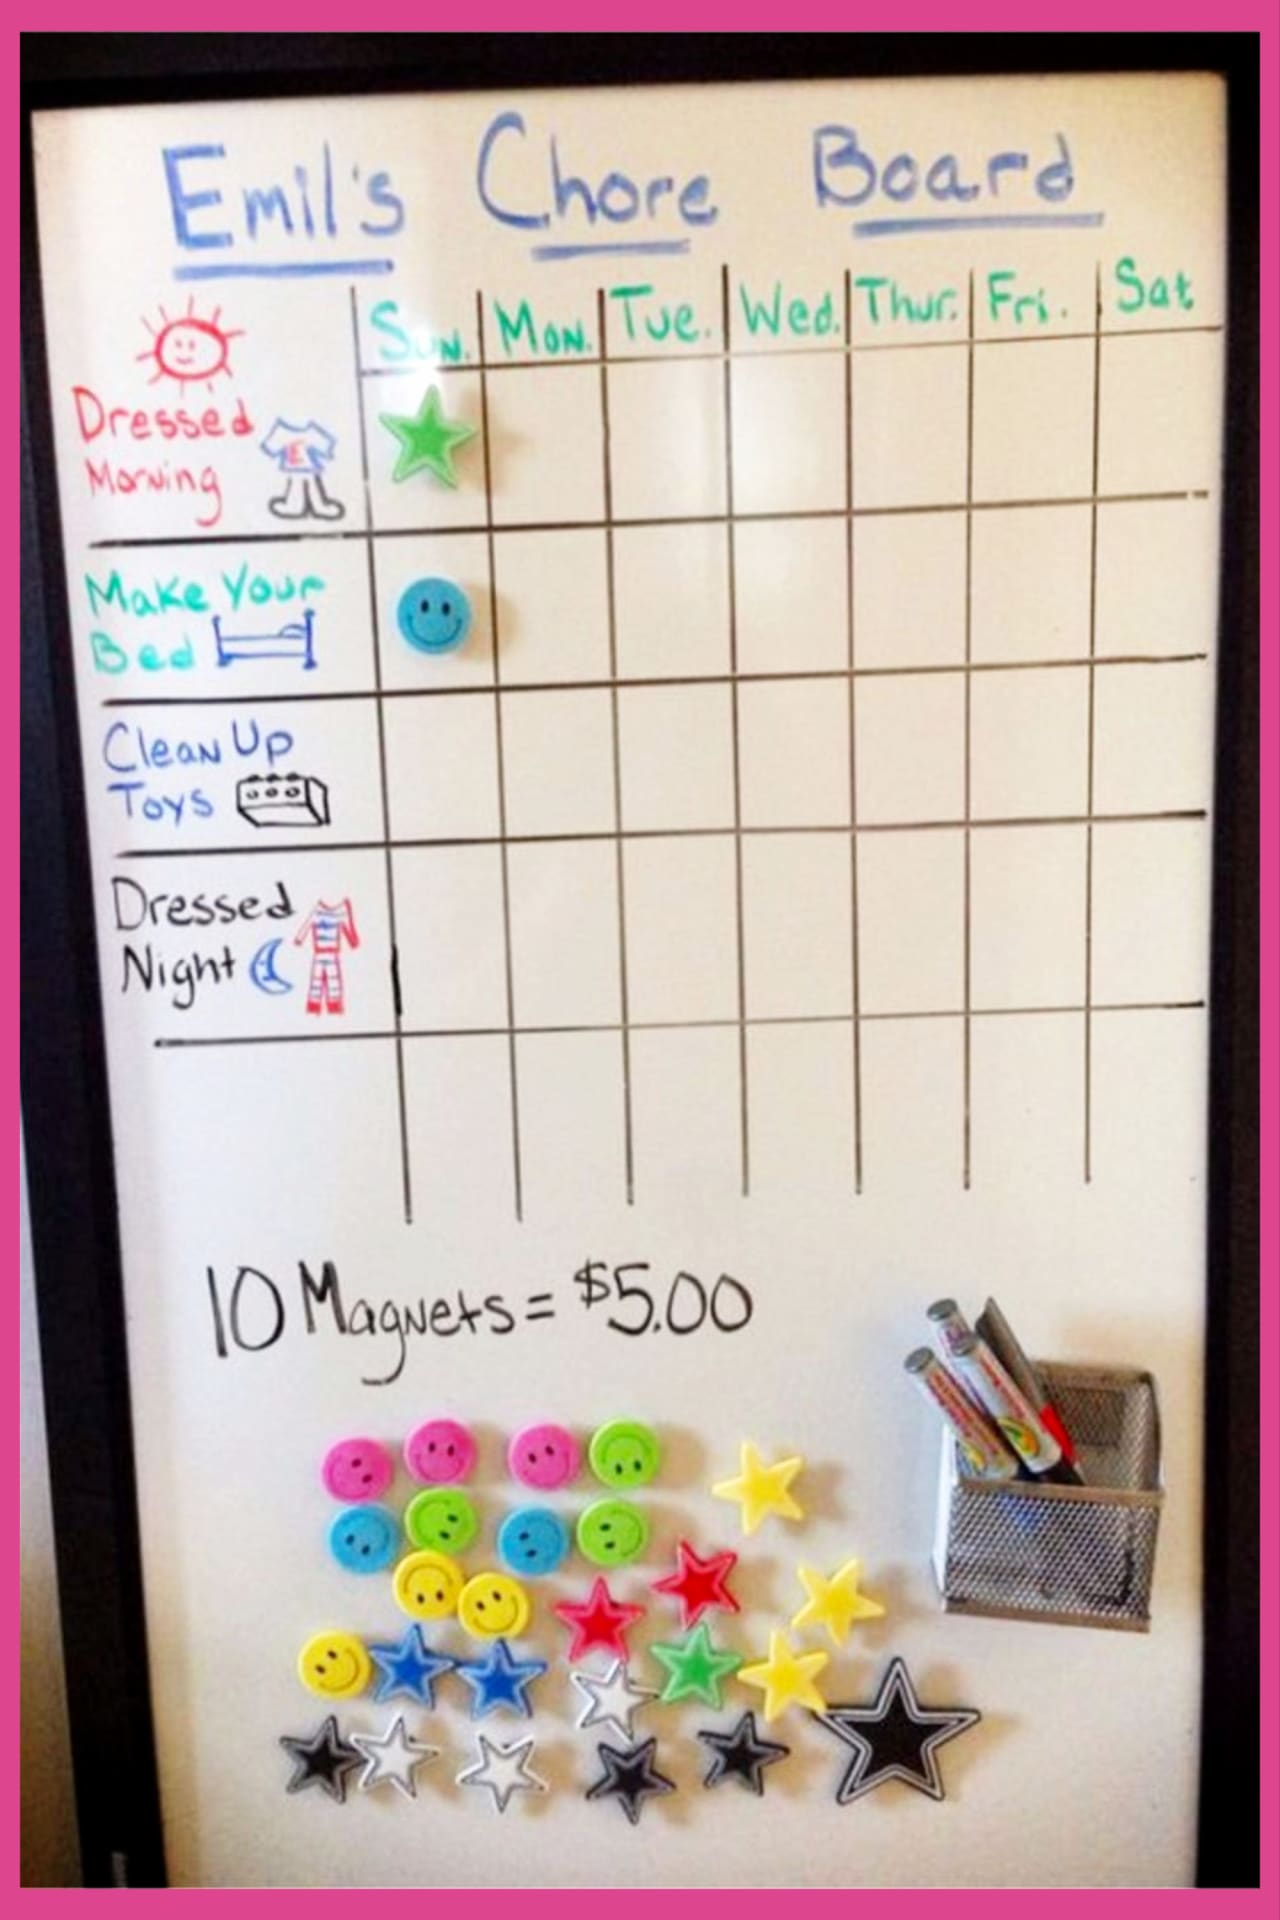 Chore Charts Ideas That Really Work To Get Kids To Do Chores WITHOUT Nagging - Best Mom Advice and Mom Hack EVER - clever and simple homemade DIY chore chart / chore board with a chores reward system (money!)